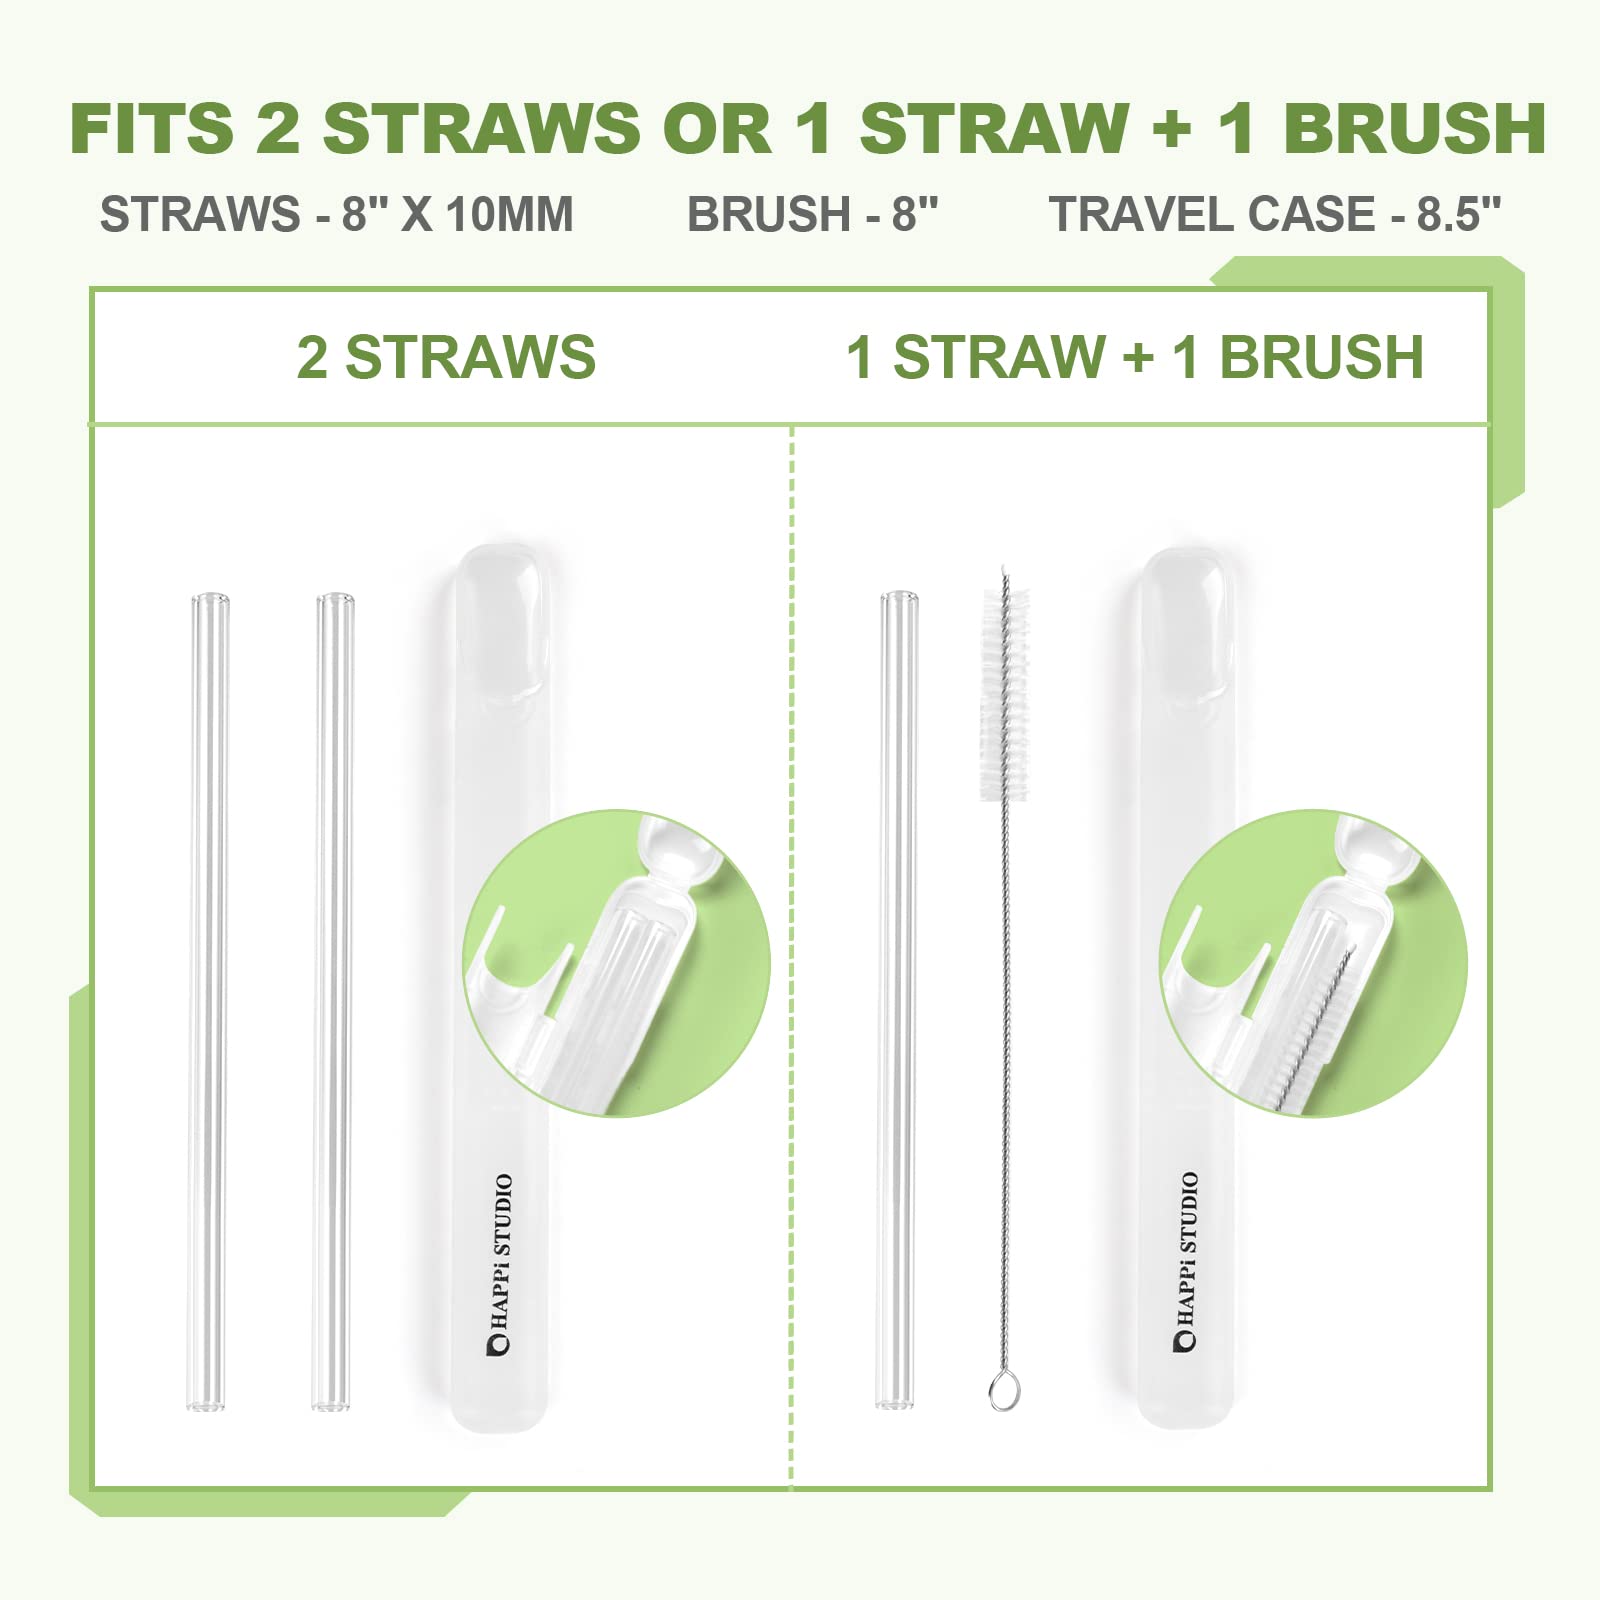 HAPPi STUDIO 8-Pack Glass Straws with Travel Case - 8"x10mm Reusable Straws with 2 Cleaning Brushes - Clear Glass Straws Shatter Resistant - Glass straws Drinking Reusable Smoothie Straw, Coffee Straw